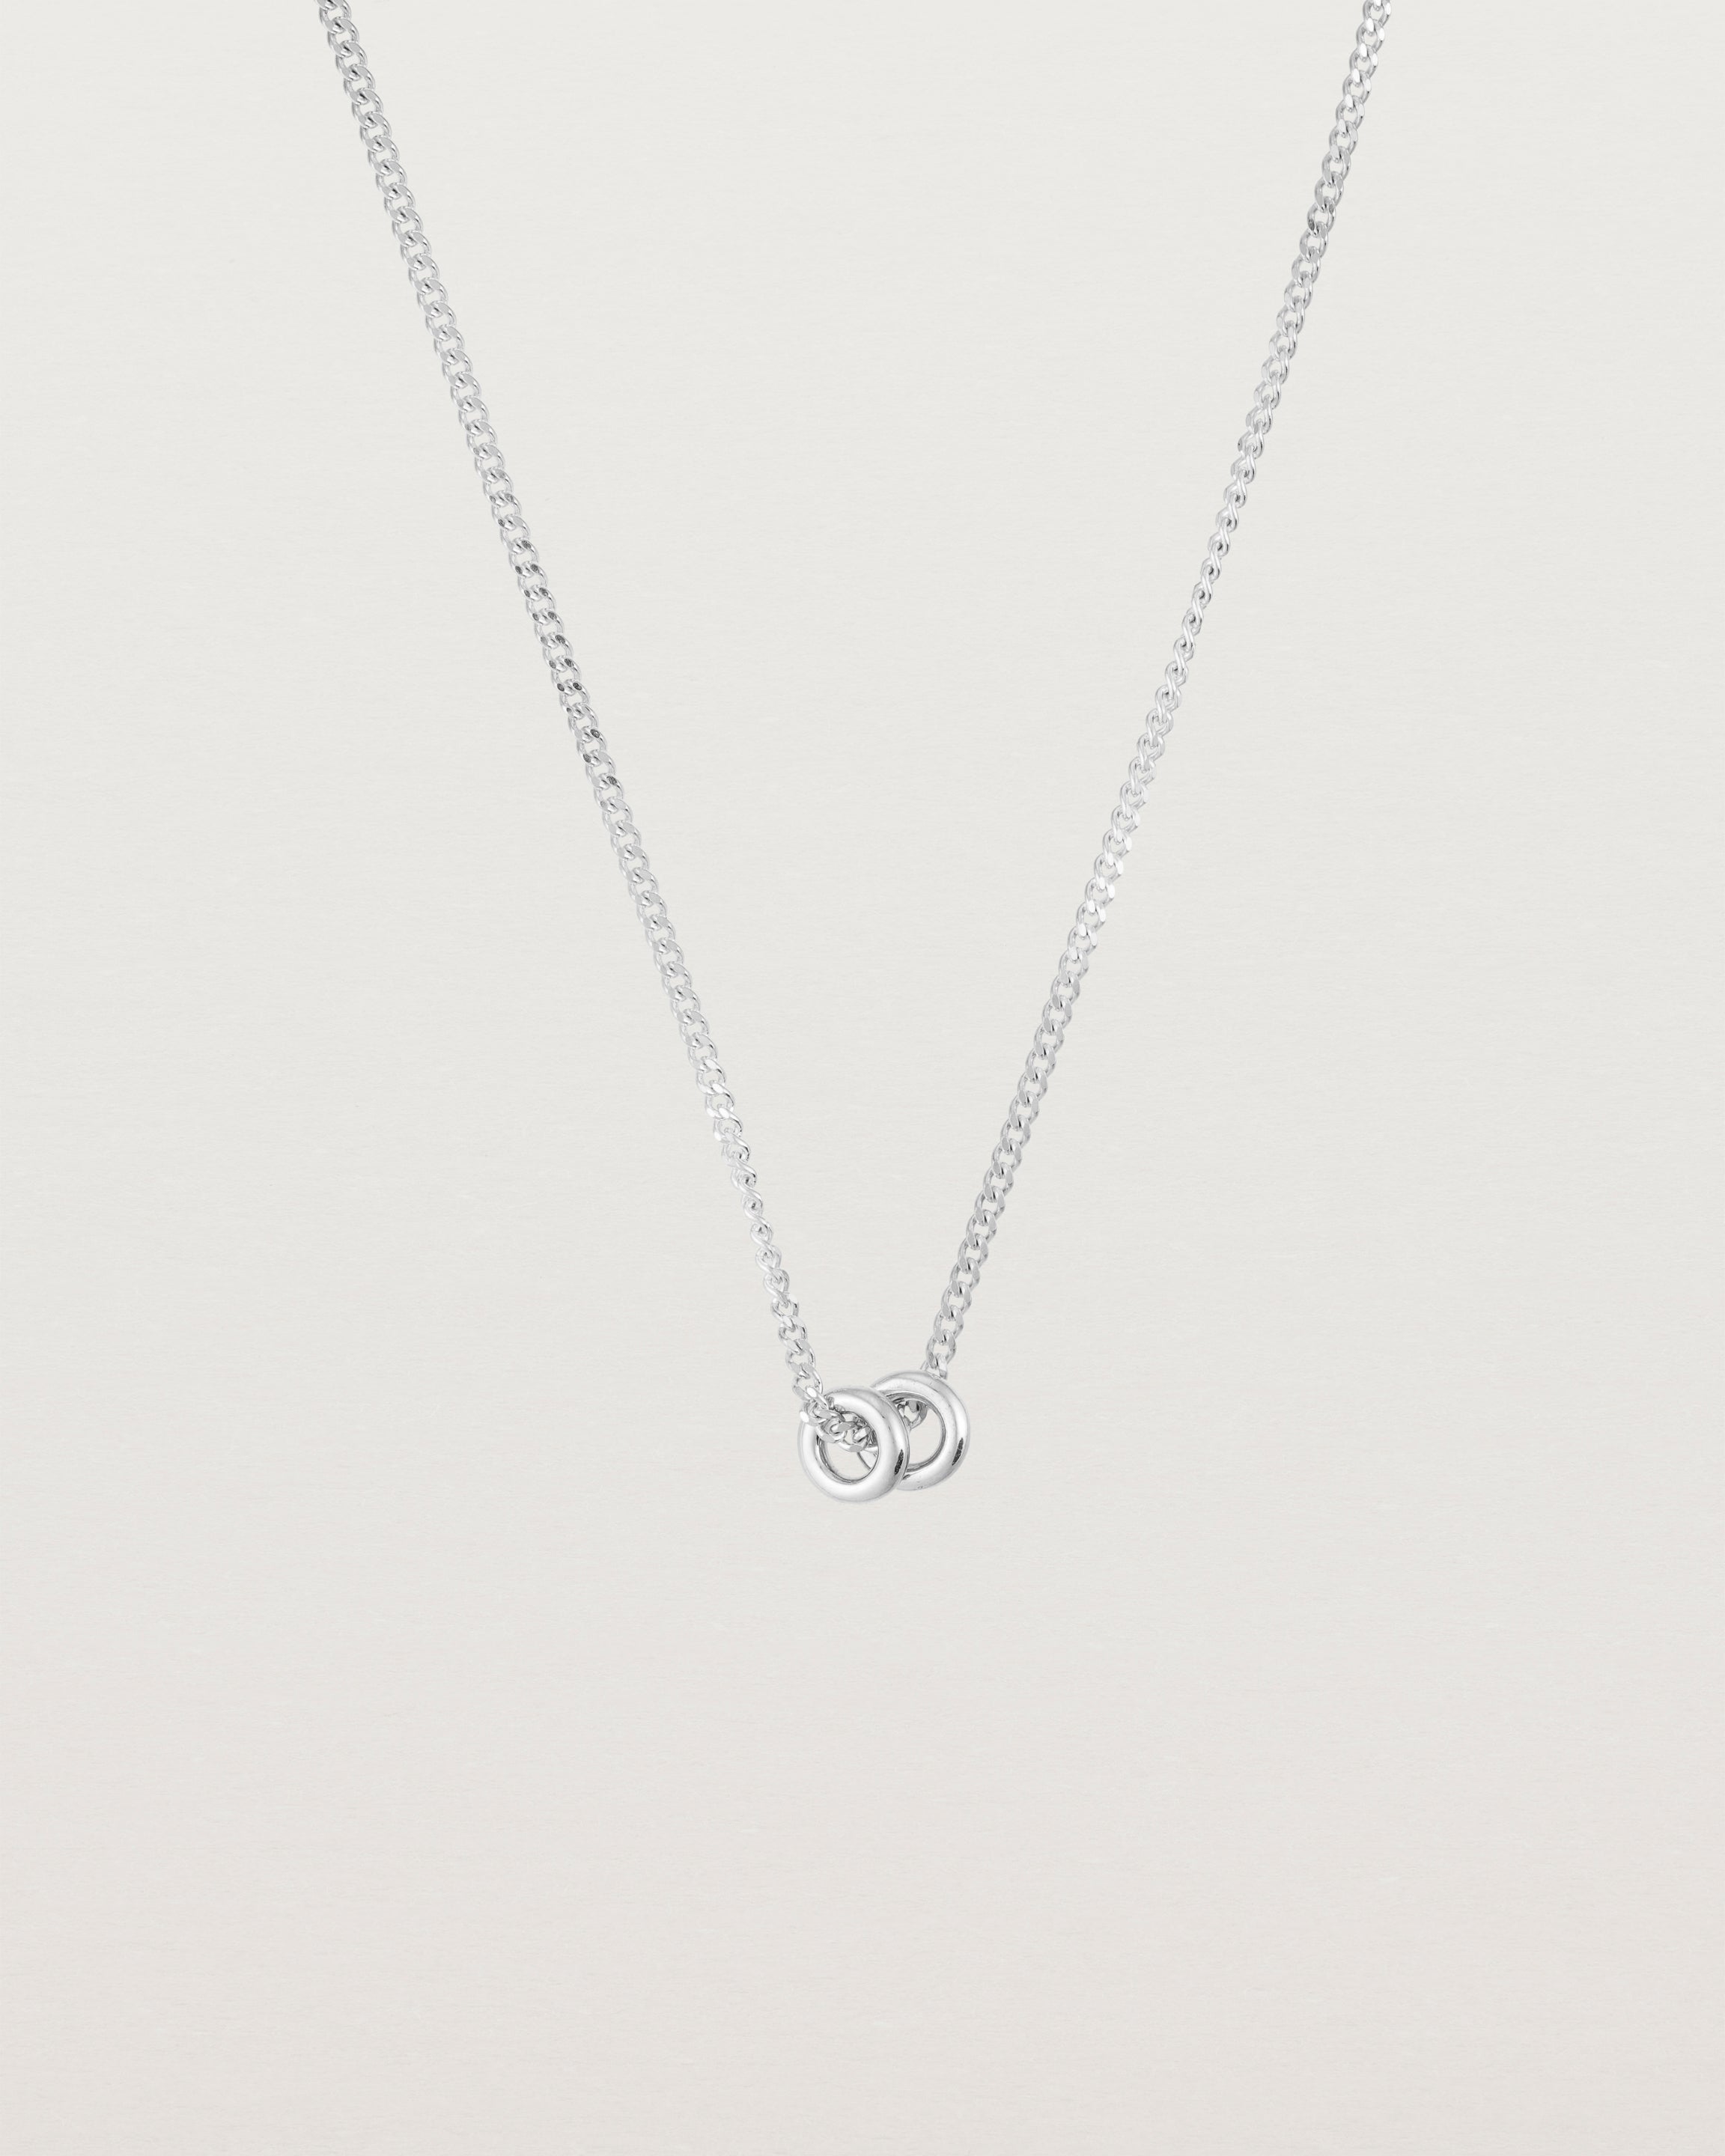 Pulled back image of the. Aether necklace in white gold with two round charms